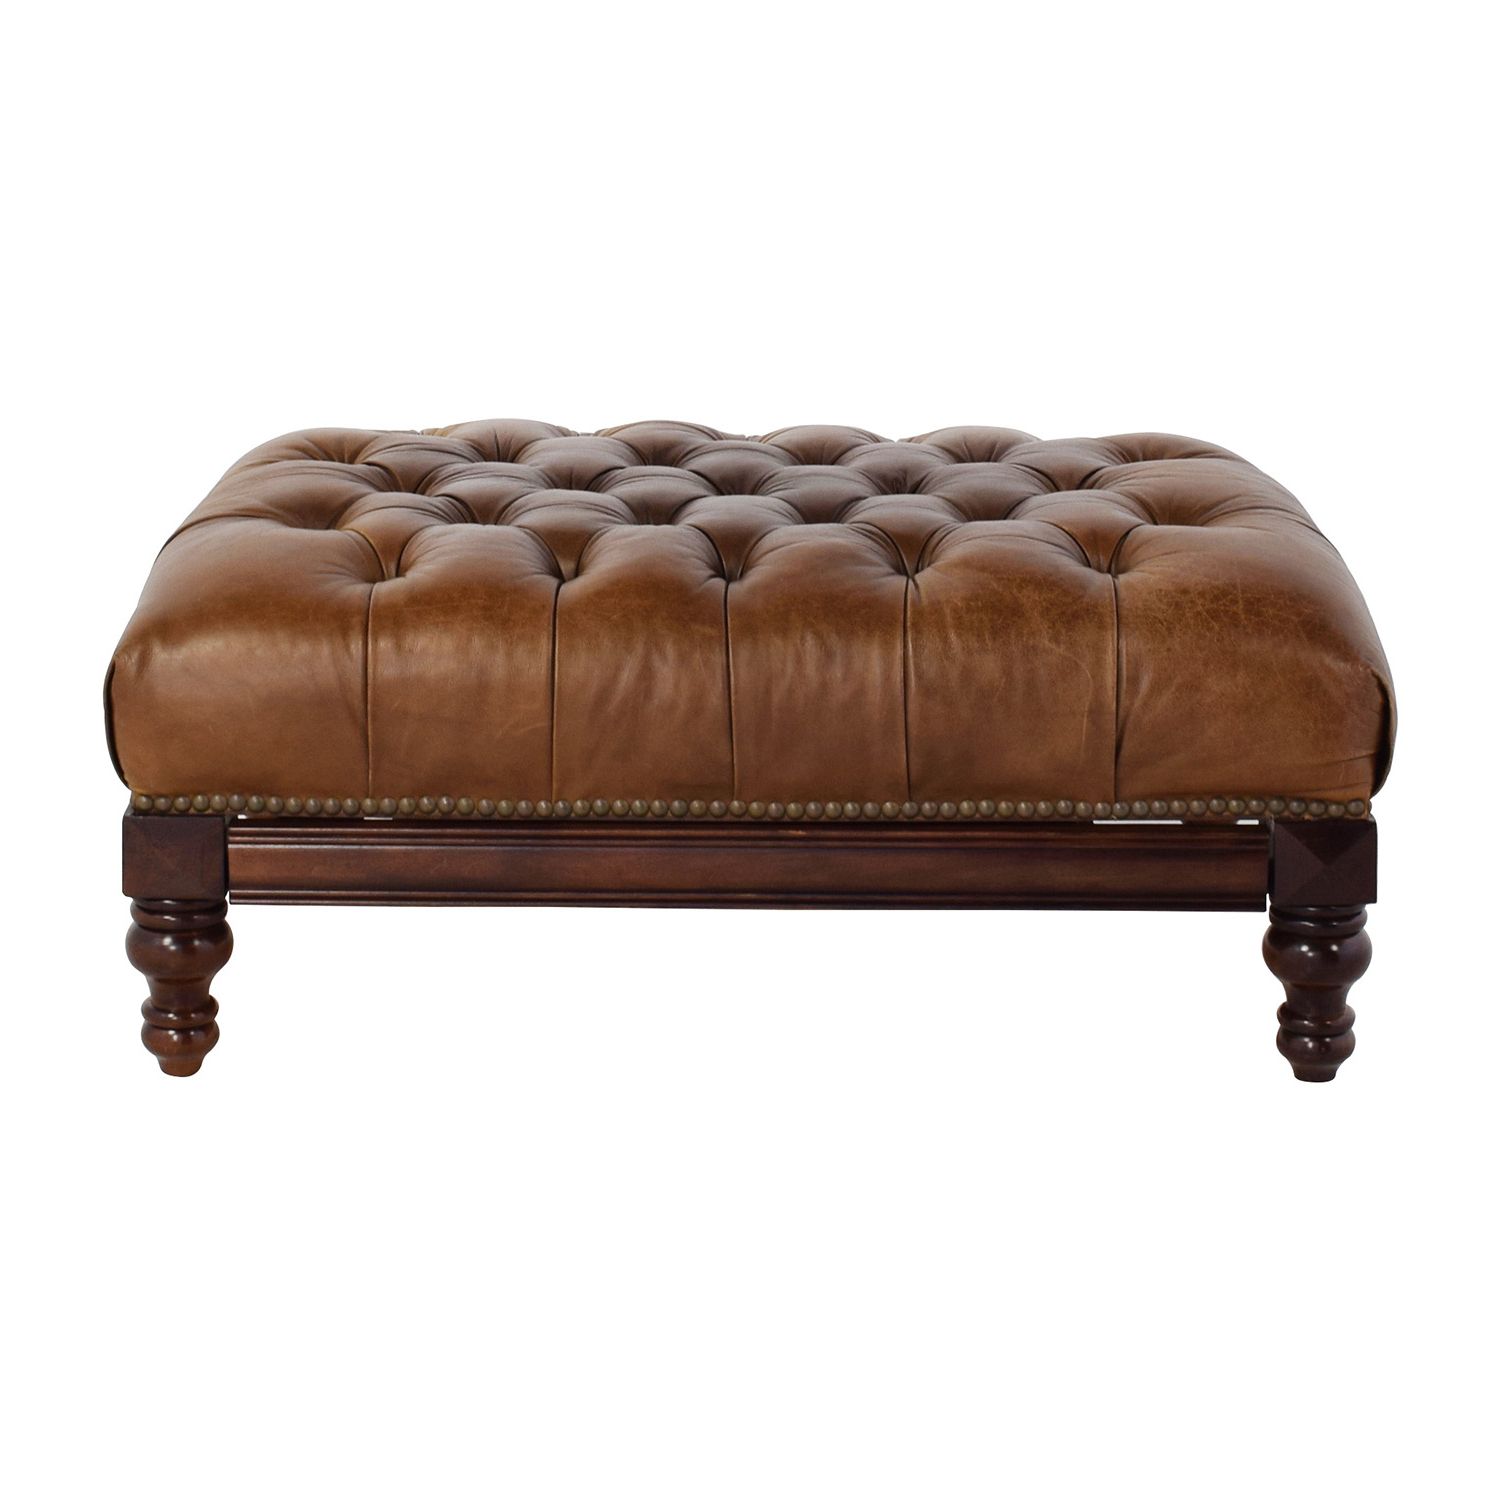 [%77% Off – Antique Tufted Leather Ottoman With Secret Storage / Storage With 2017 Orange Tufted Faux Leather Storage Ottomans|orange Tufted Faux Leather Storage Ottomans For Newest 77% Off – Antique Tufted Leather Ottoman With Secret Storage / Storage|most Up To Date Orange Tufted Faux Leather Storage Ottomans Regarding 77% Off – Antique Tufted Leather Ottoman With Secret Storage / Storage|2017 77% Off – Antique Tufted Leather Ottoman With Secret Storage / Storage Throughout Orange Tufted Faux Leather Storage Ottomans%] (View 9 of 10)